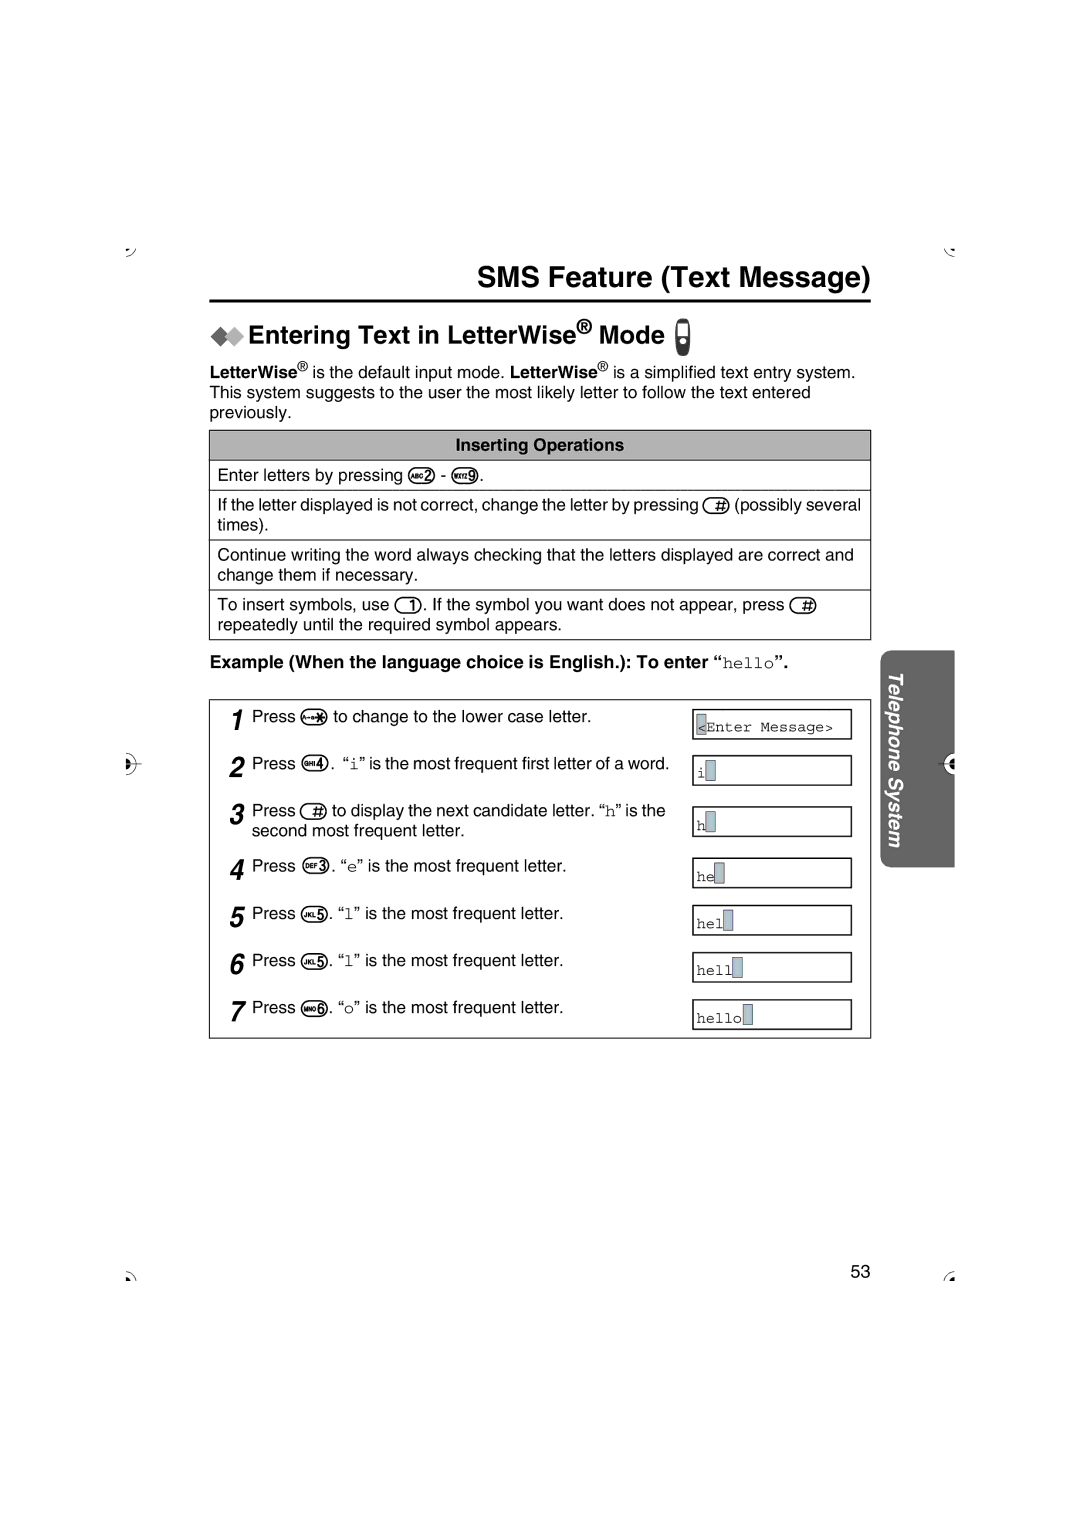 Panasonic KX-TCD535HK operating instructions Entering Text in LetterWise Mode, Inserting Operations 